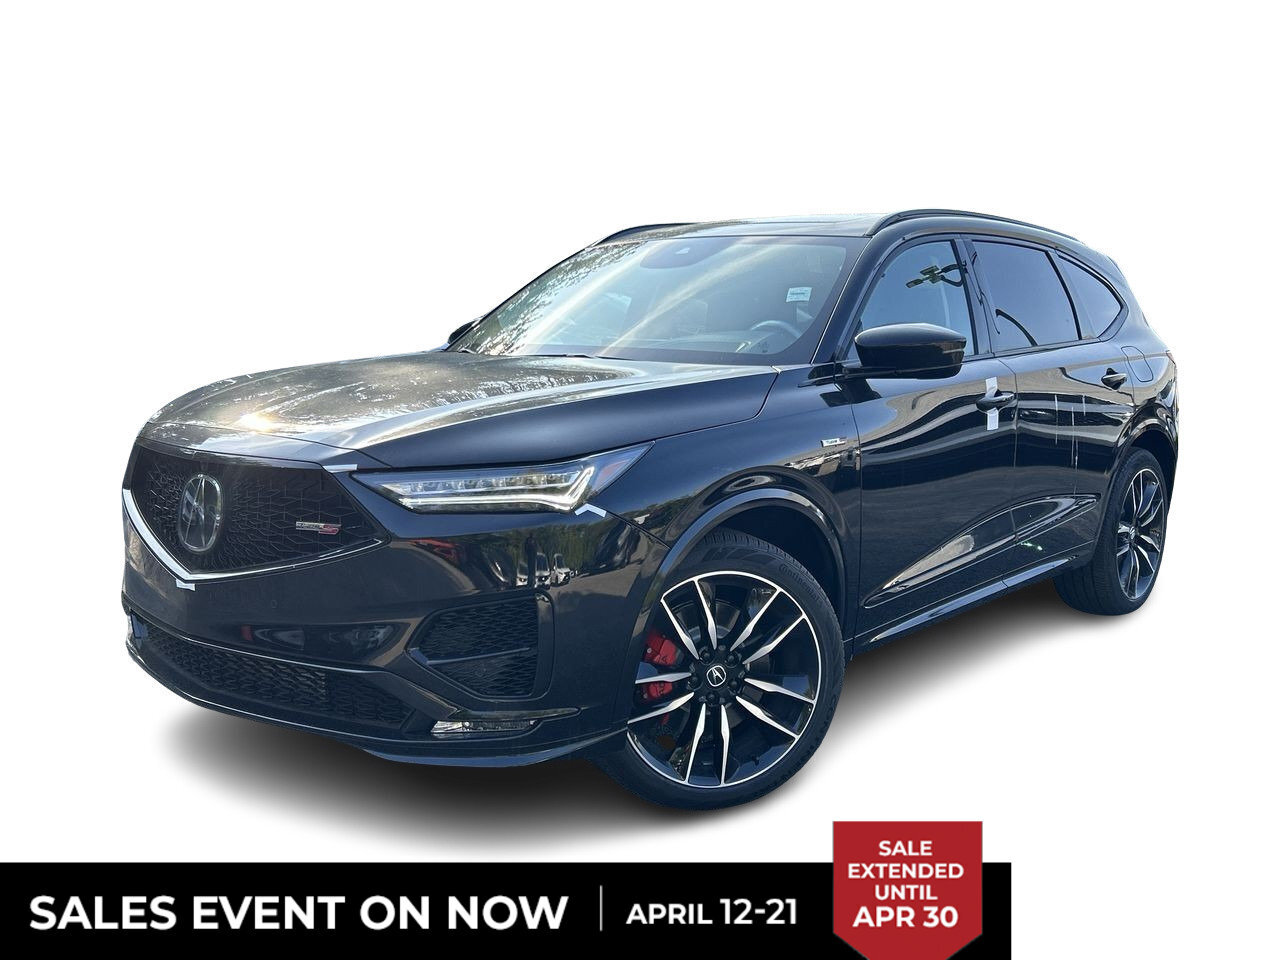 2024 Acura MDX Type-S Ultra 3.0L Turbocharged V6 | Air Suspension